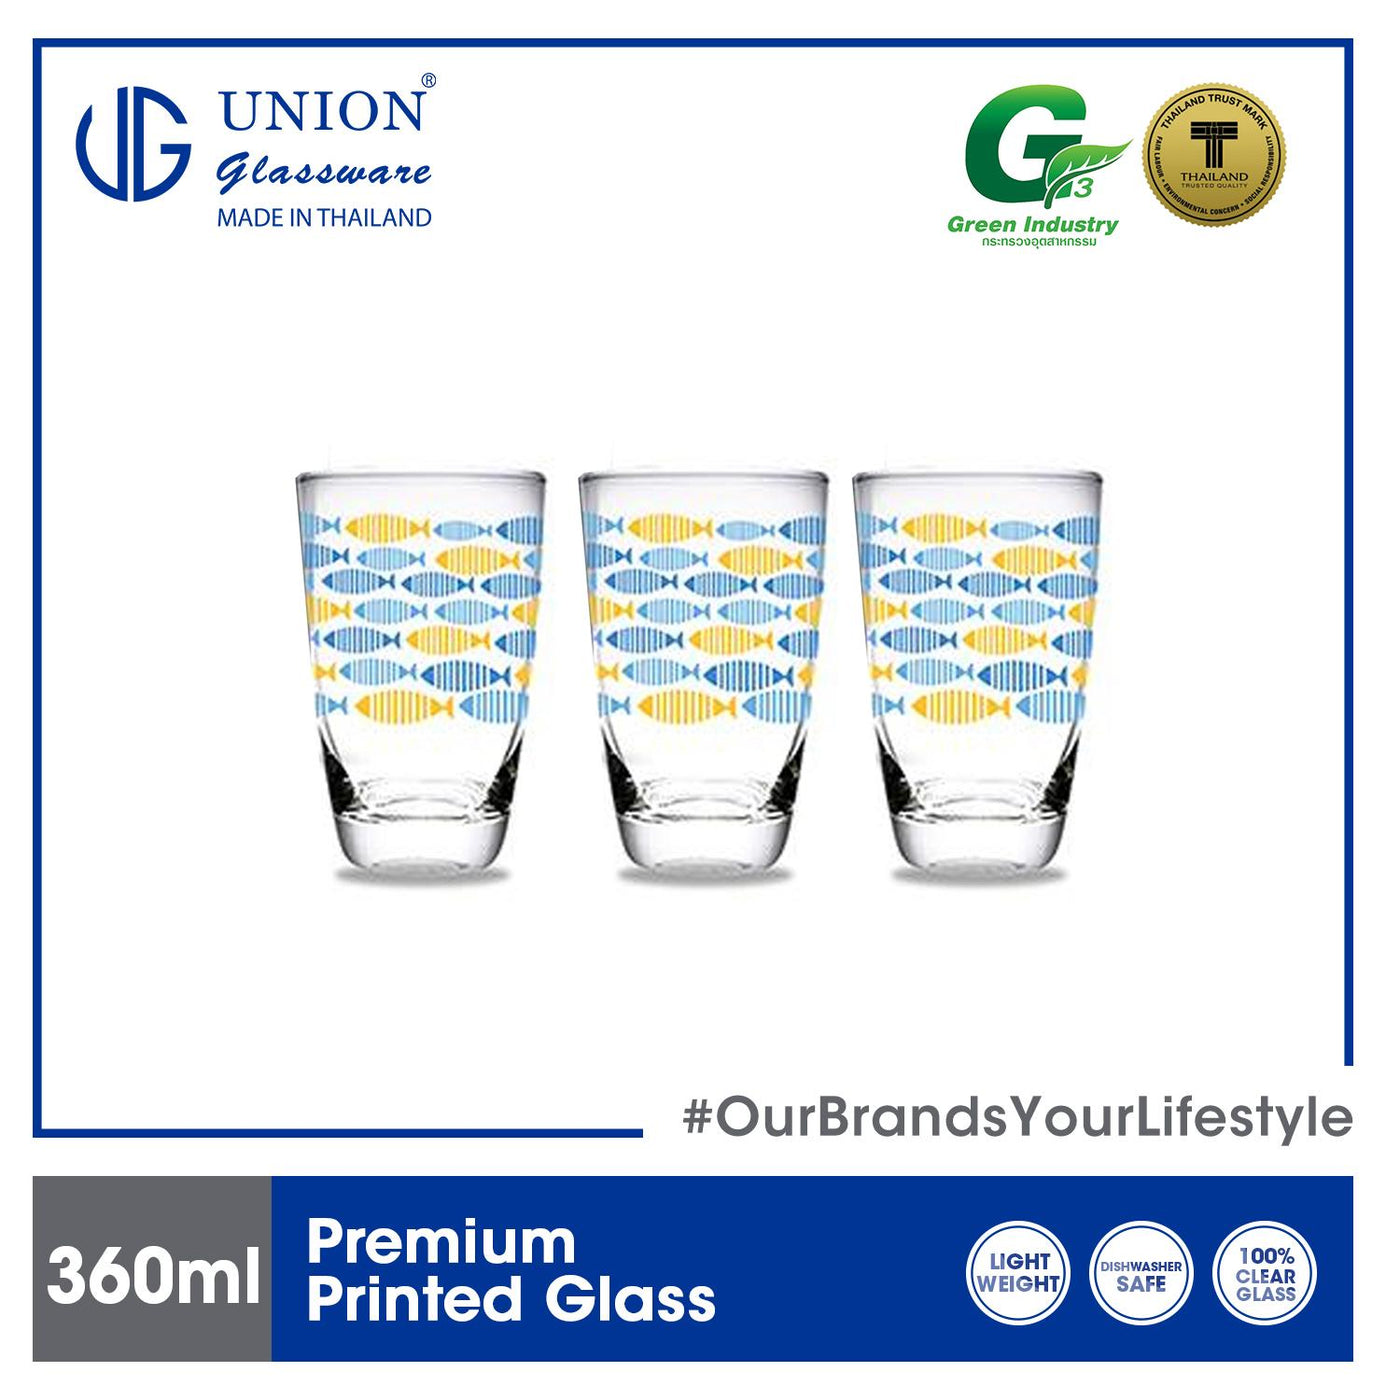 UNION GLASS Thailand Premium Printed Glass Limited Edition Design Water, Juice, Soda, Liquor Glass 360ml 13oz Set of 3 Amazing Gift Idea For Any Occasion!